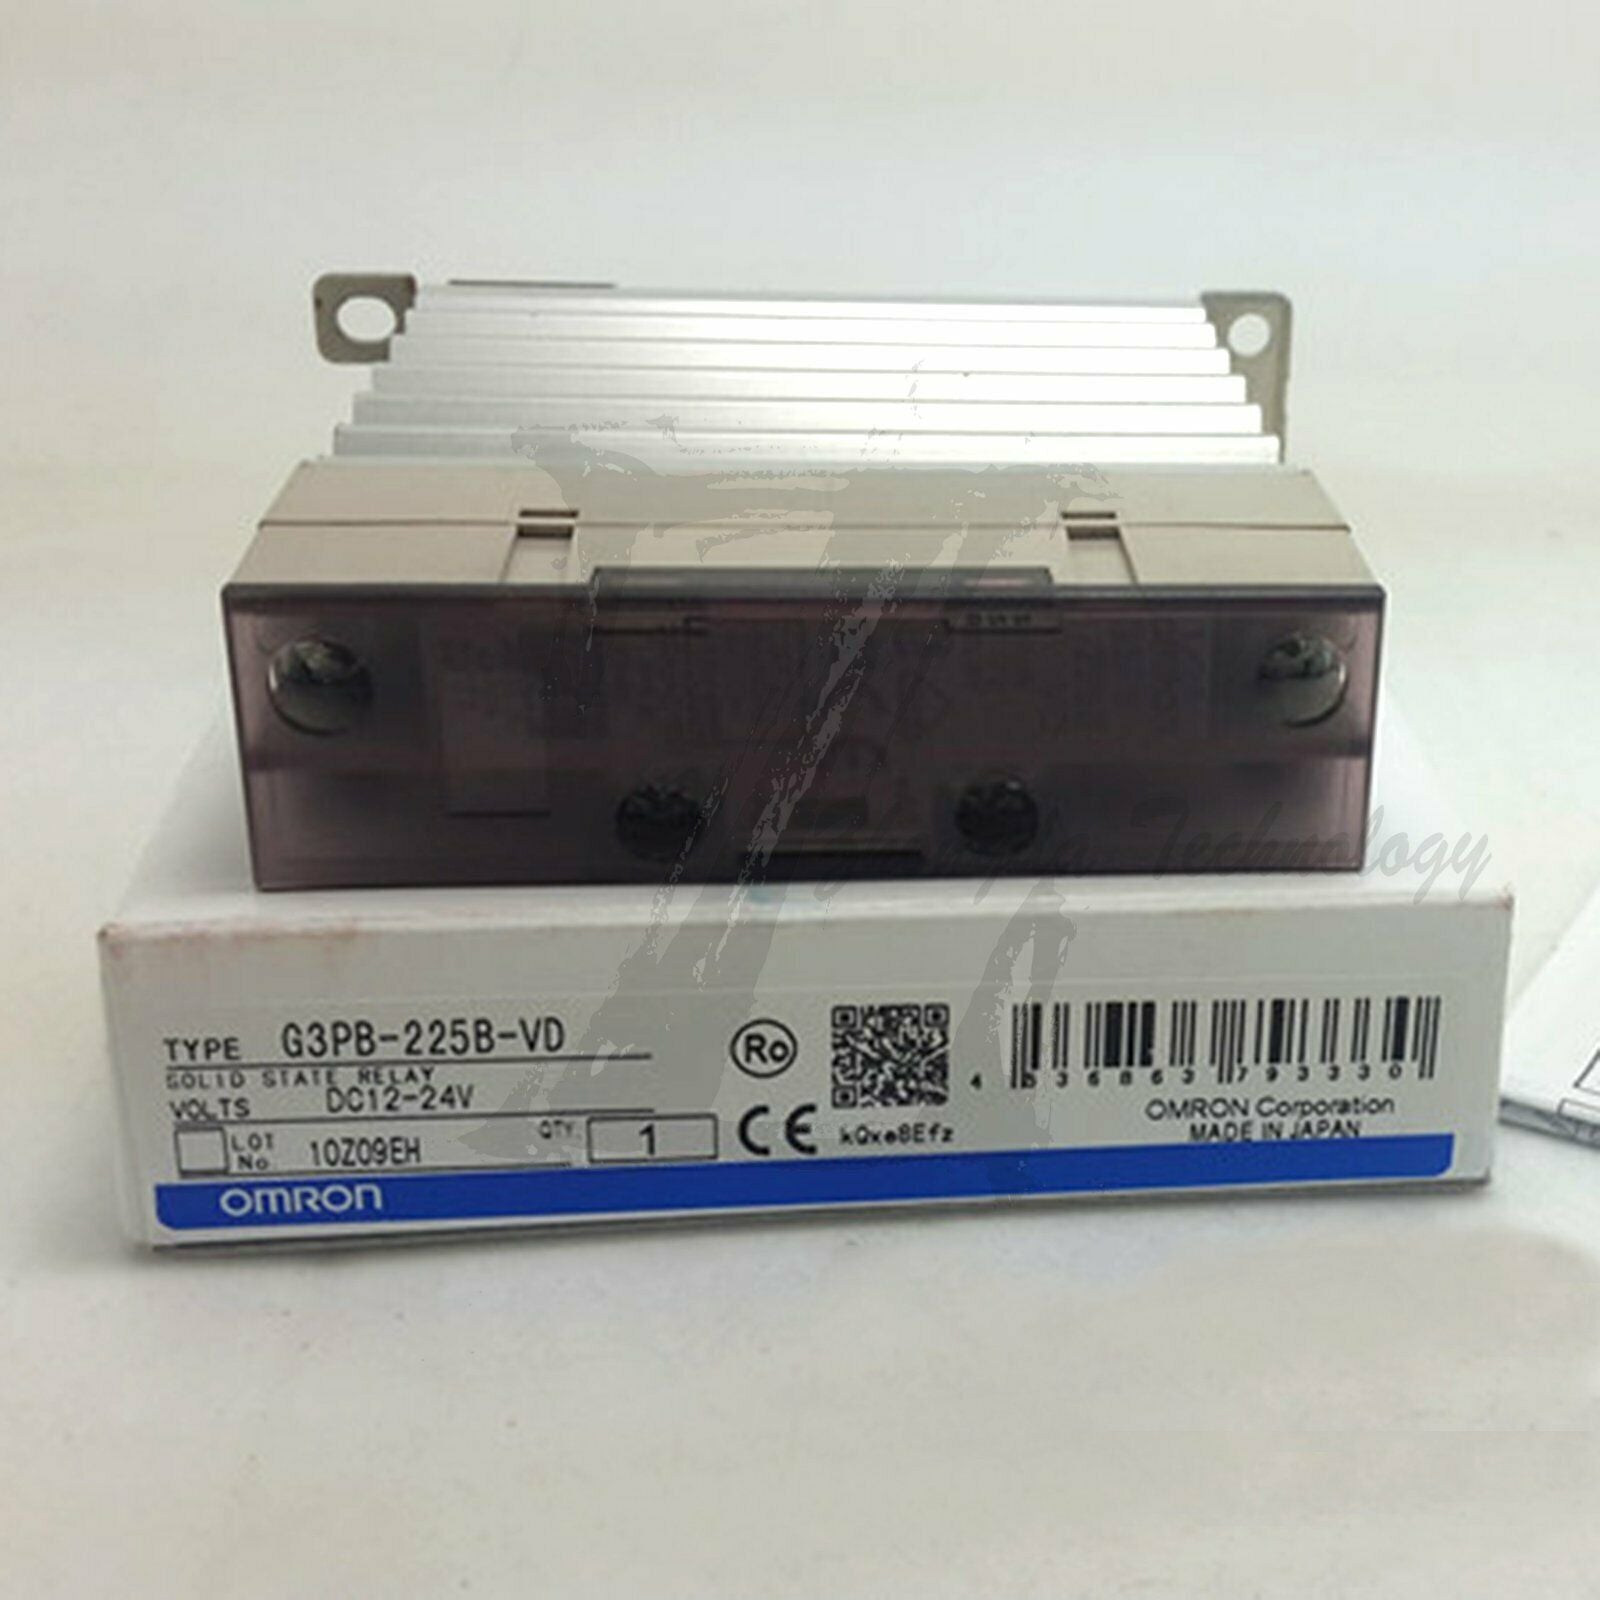 NEW OMRON Solid State Relay G3PB-225B-VD 25ADC12-24V